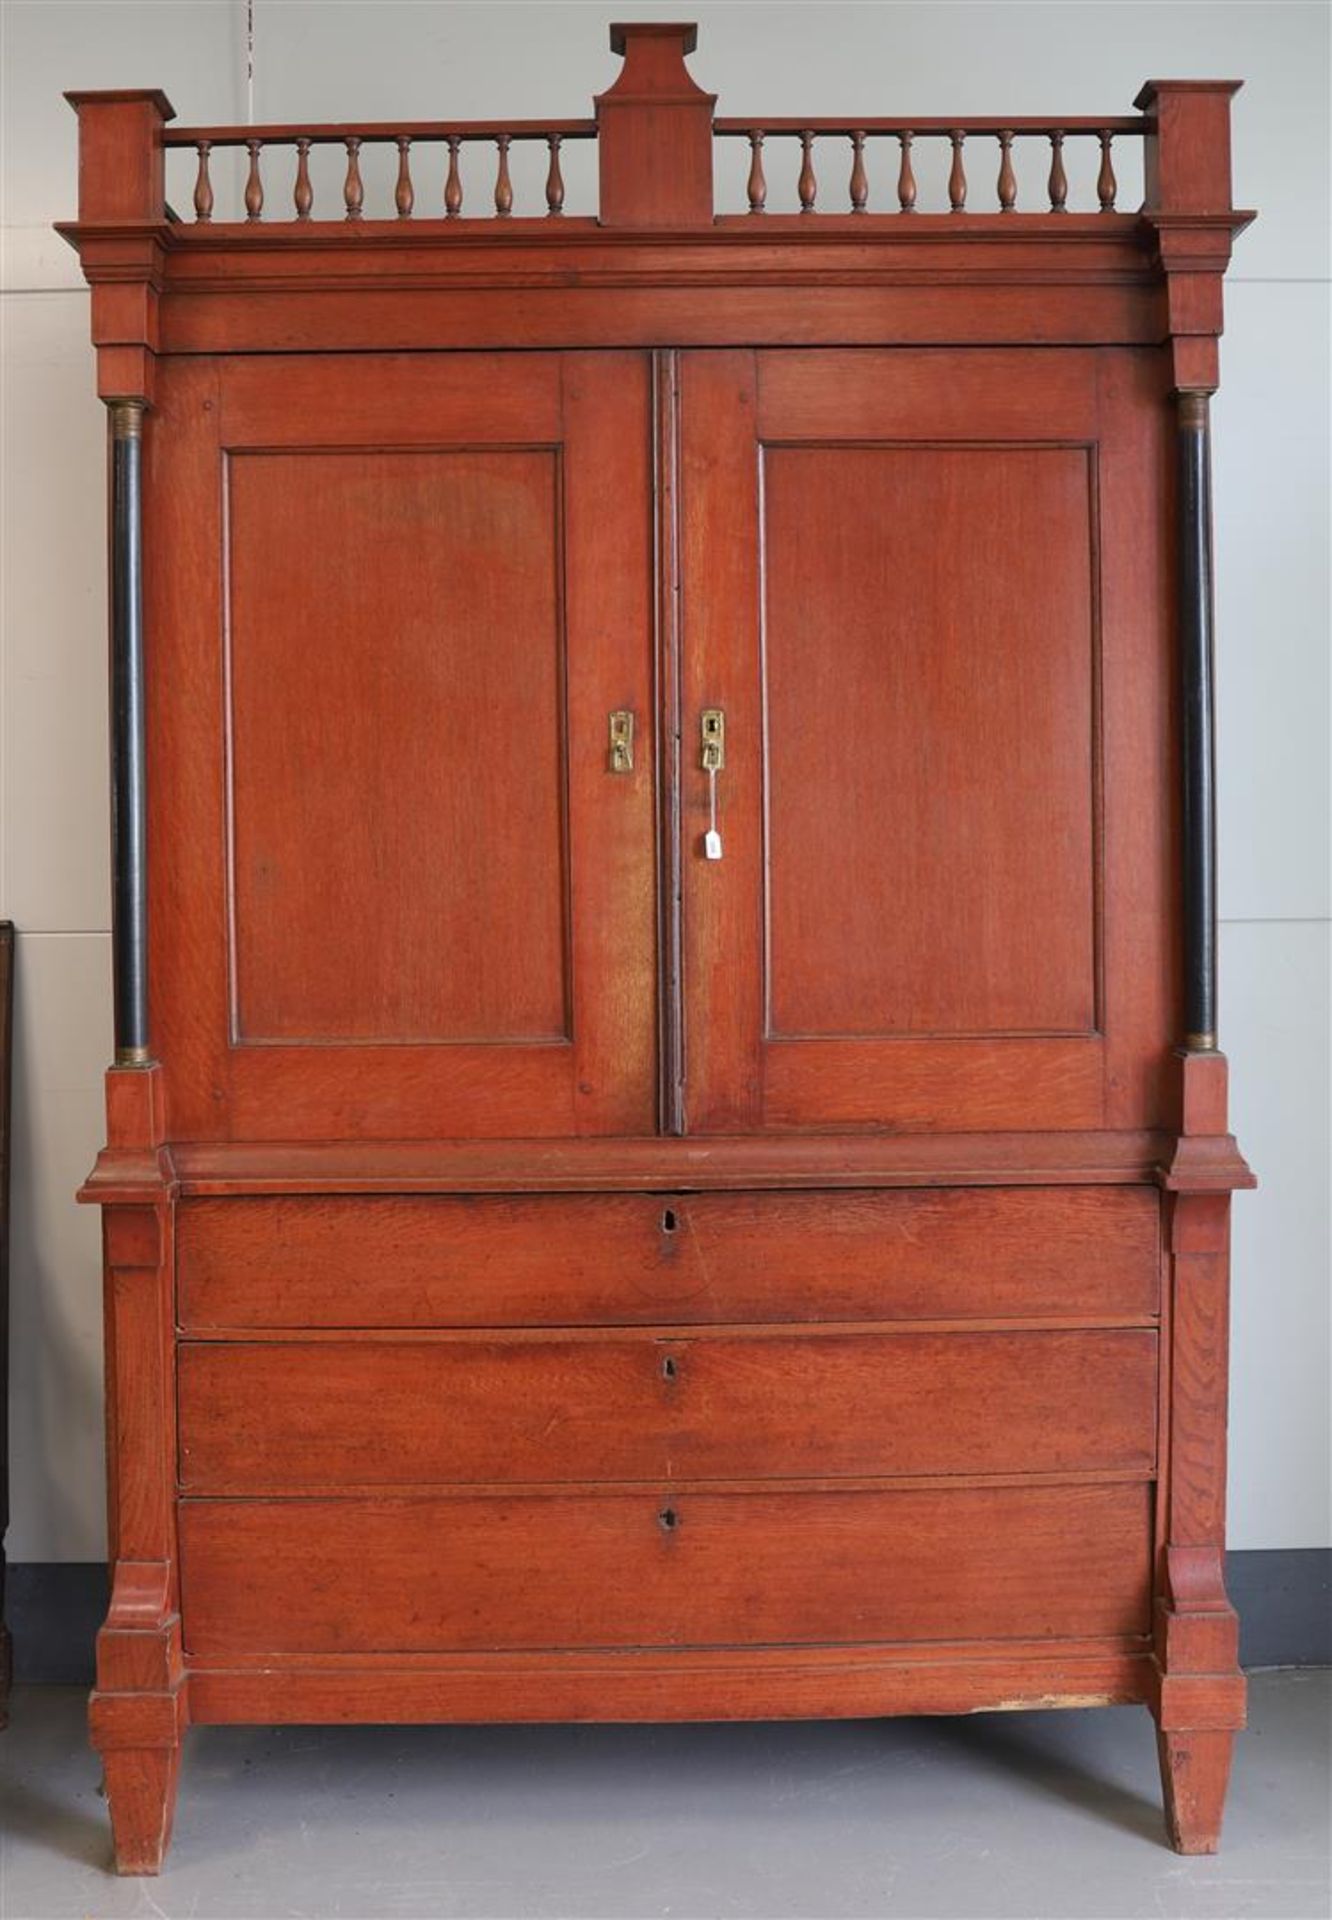 A two-door cabinet, Netherlands, early 19th century.